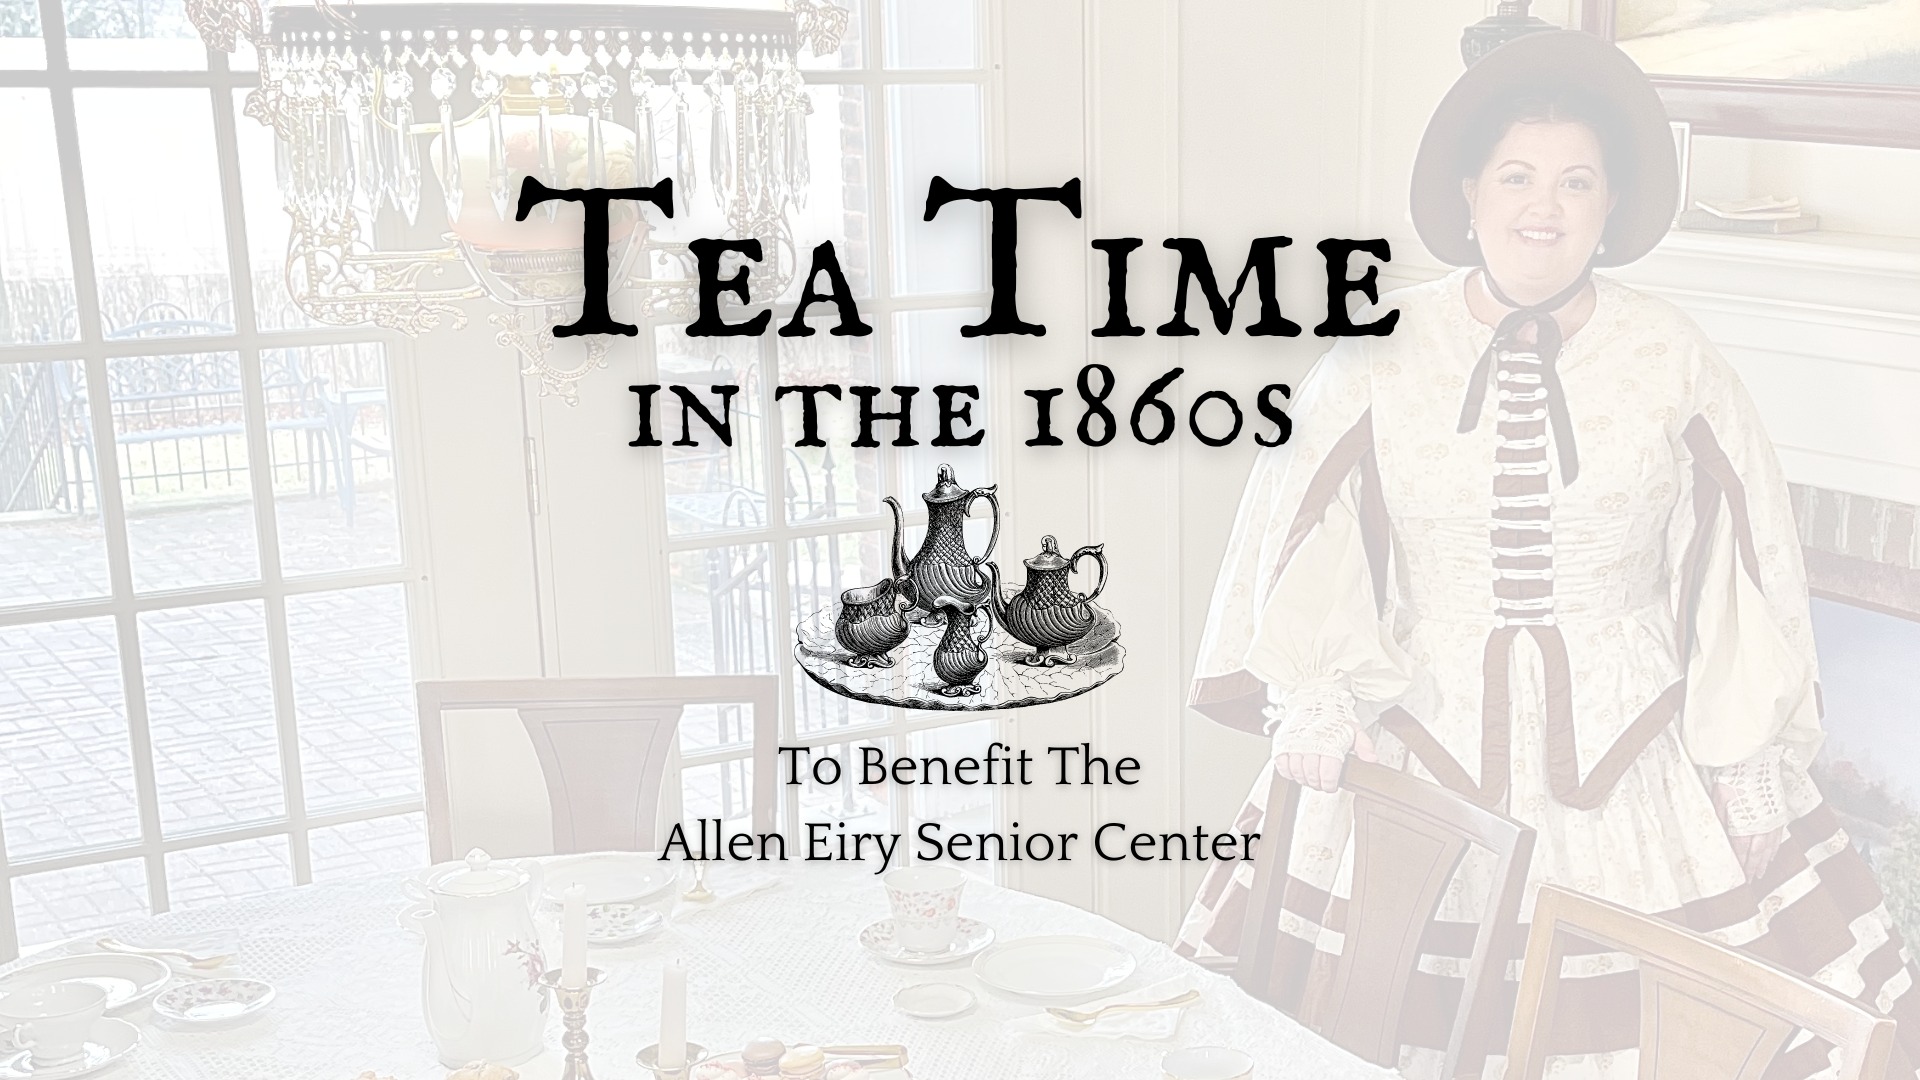 Tea Time in the 1860s to Benefit the Allen Eiry Senior Center